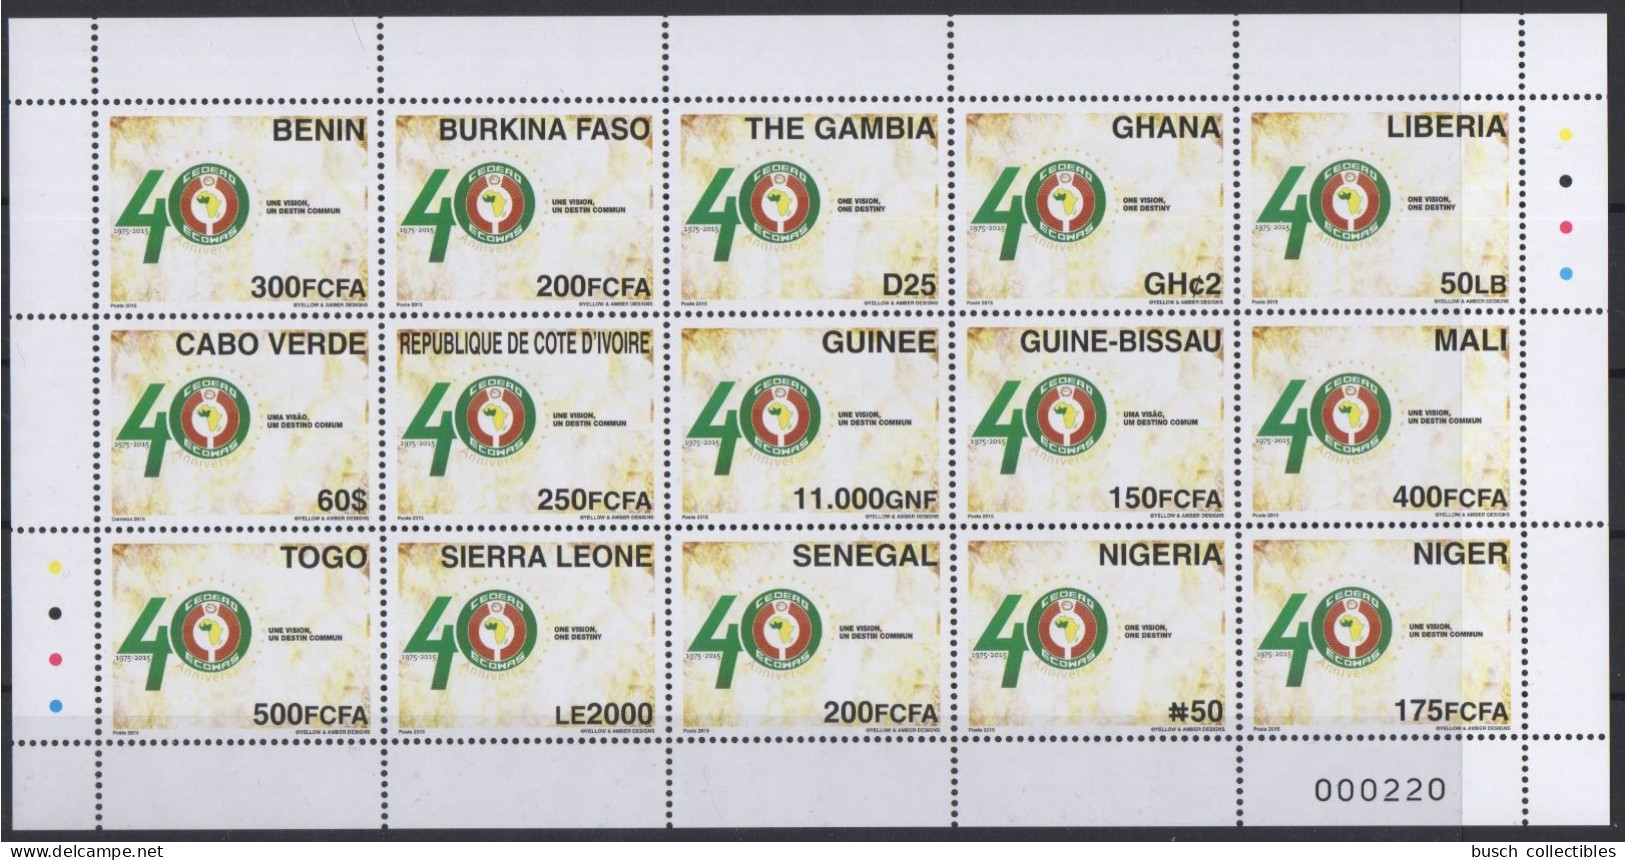 ULTRA RARE Feuille 15 Pays 15 Countries Sheet 15 Länder 2015 Emission Commune Joint Issue CEDEAO ECOWAS 40 Ans 40 Years - Cape Verde